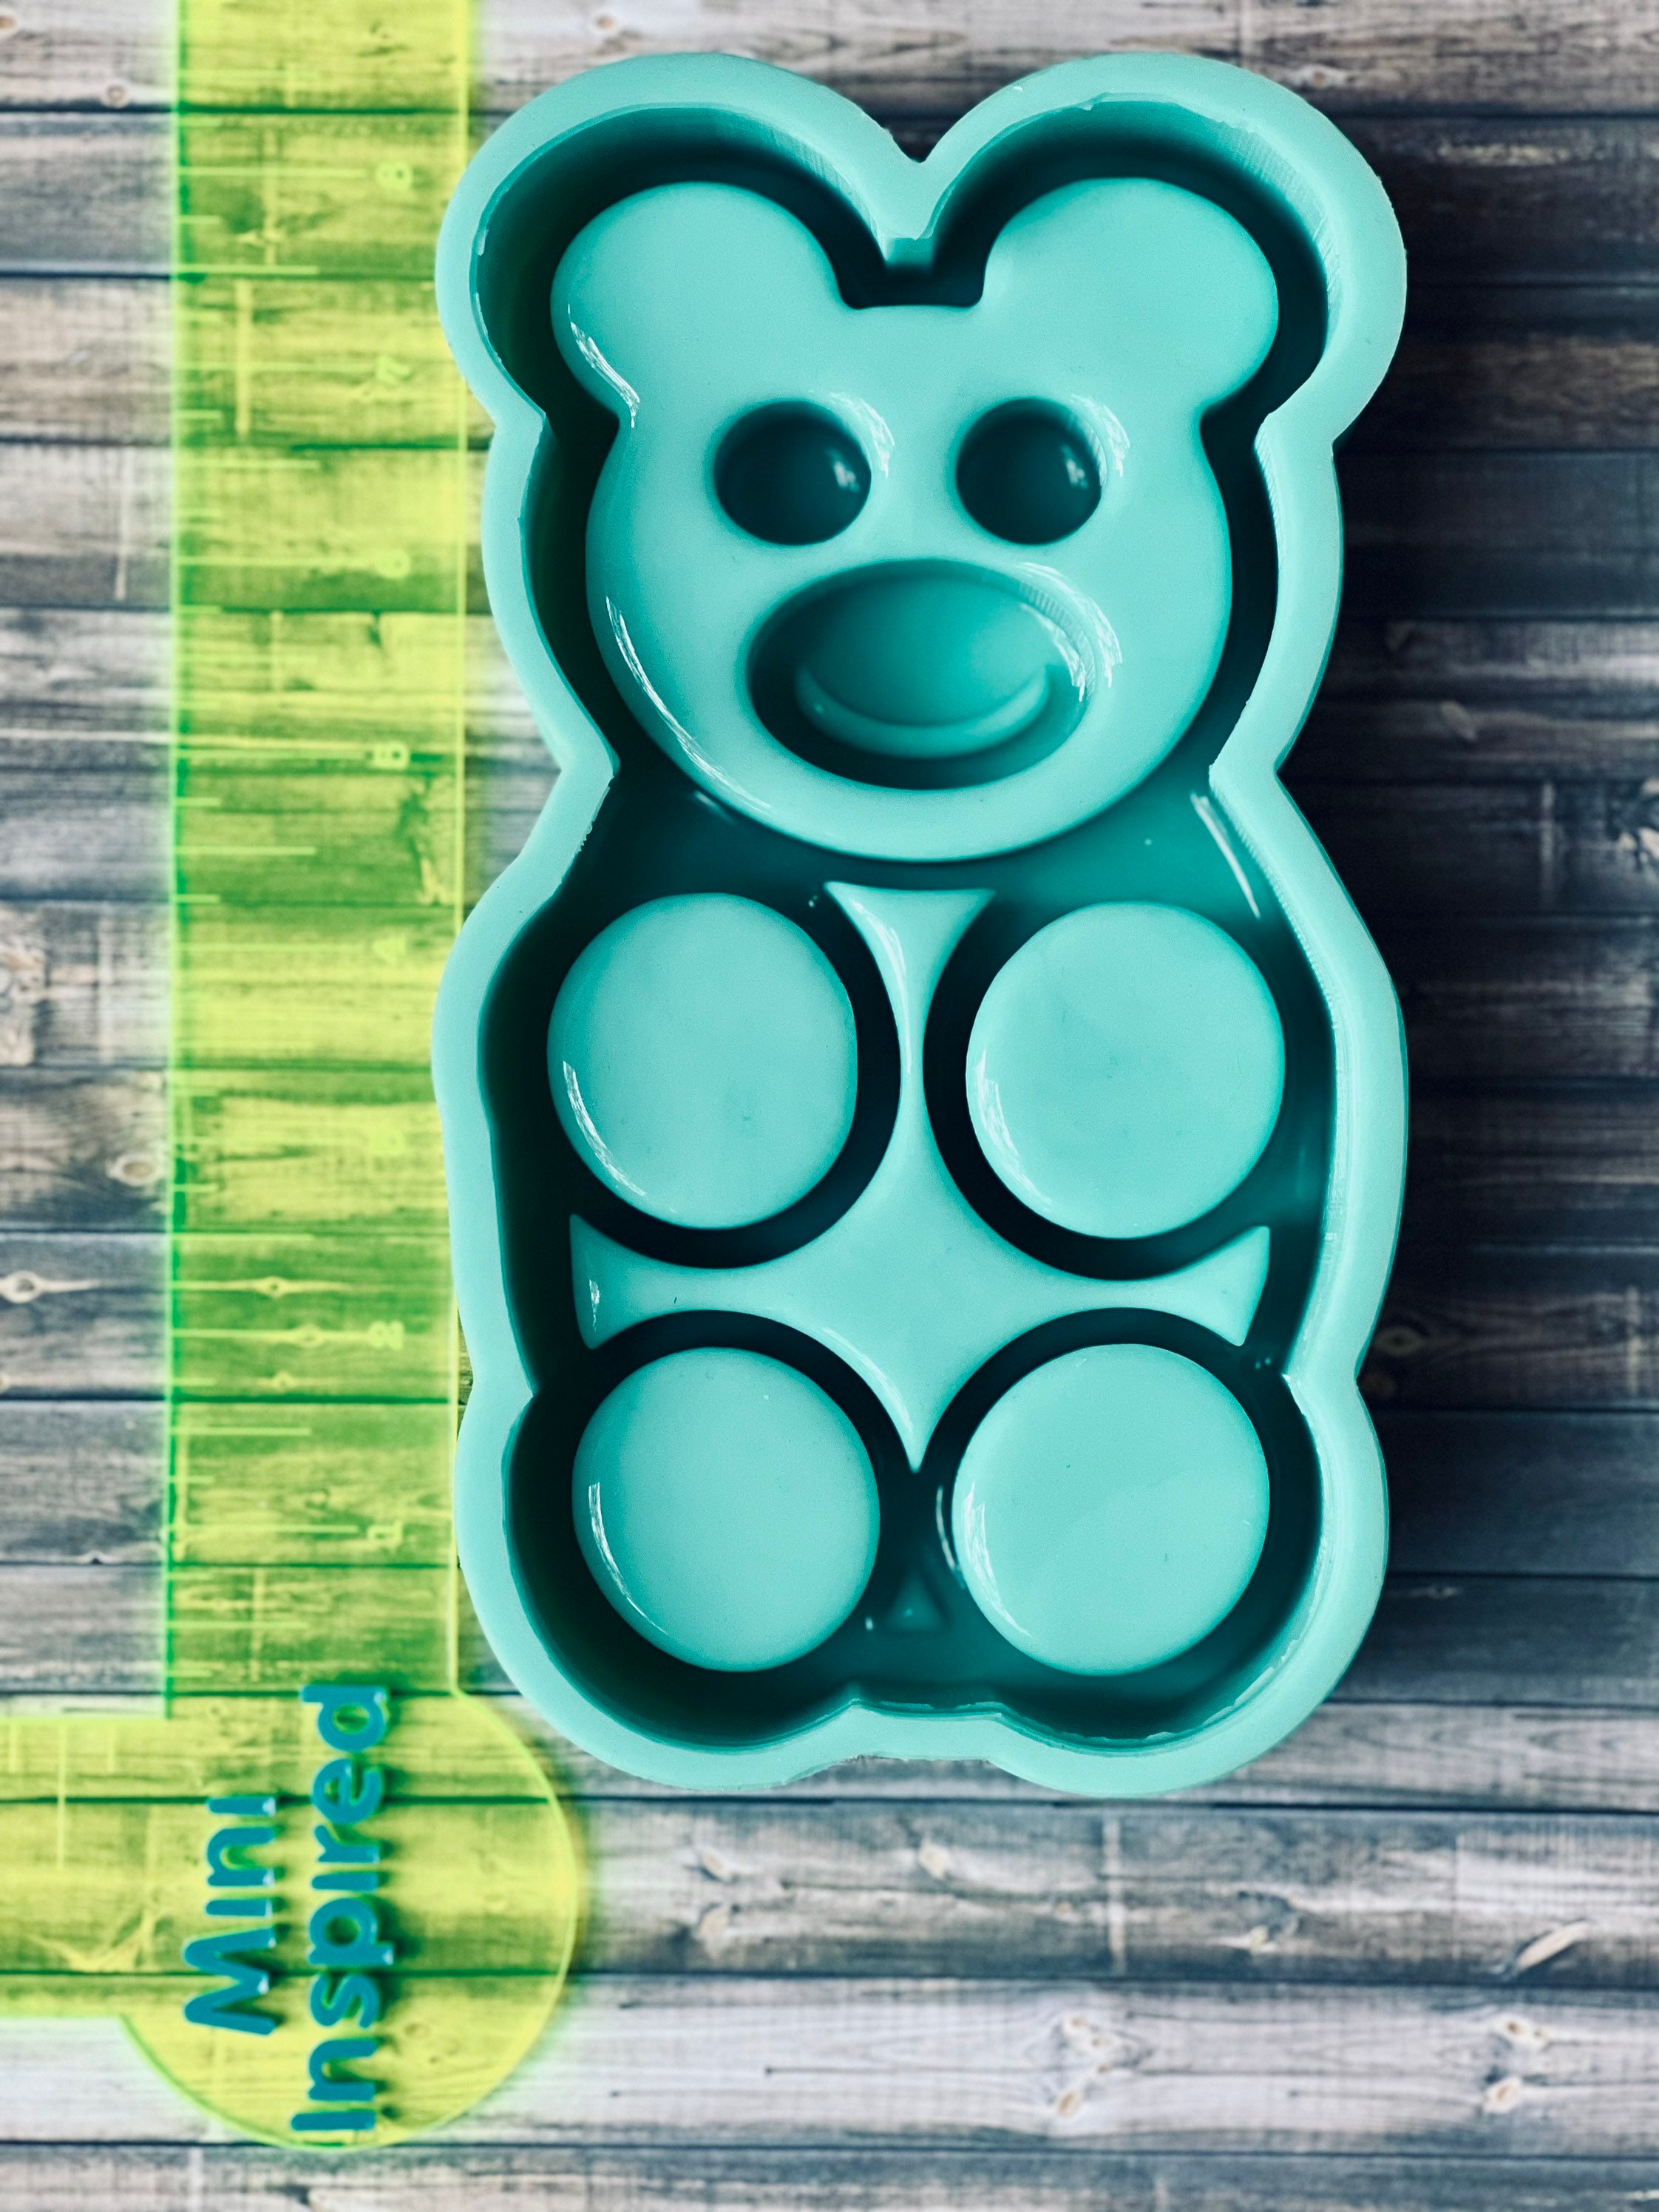 Gummy Bear Mold Candy Making Supplies Chocolate Ice Maker Soft Silicone  Molds 5 Pack With 5 Liquid Droppers, Making 250 Bears 